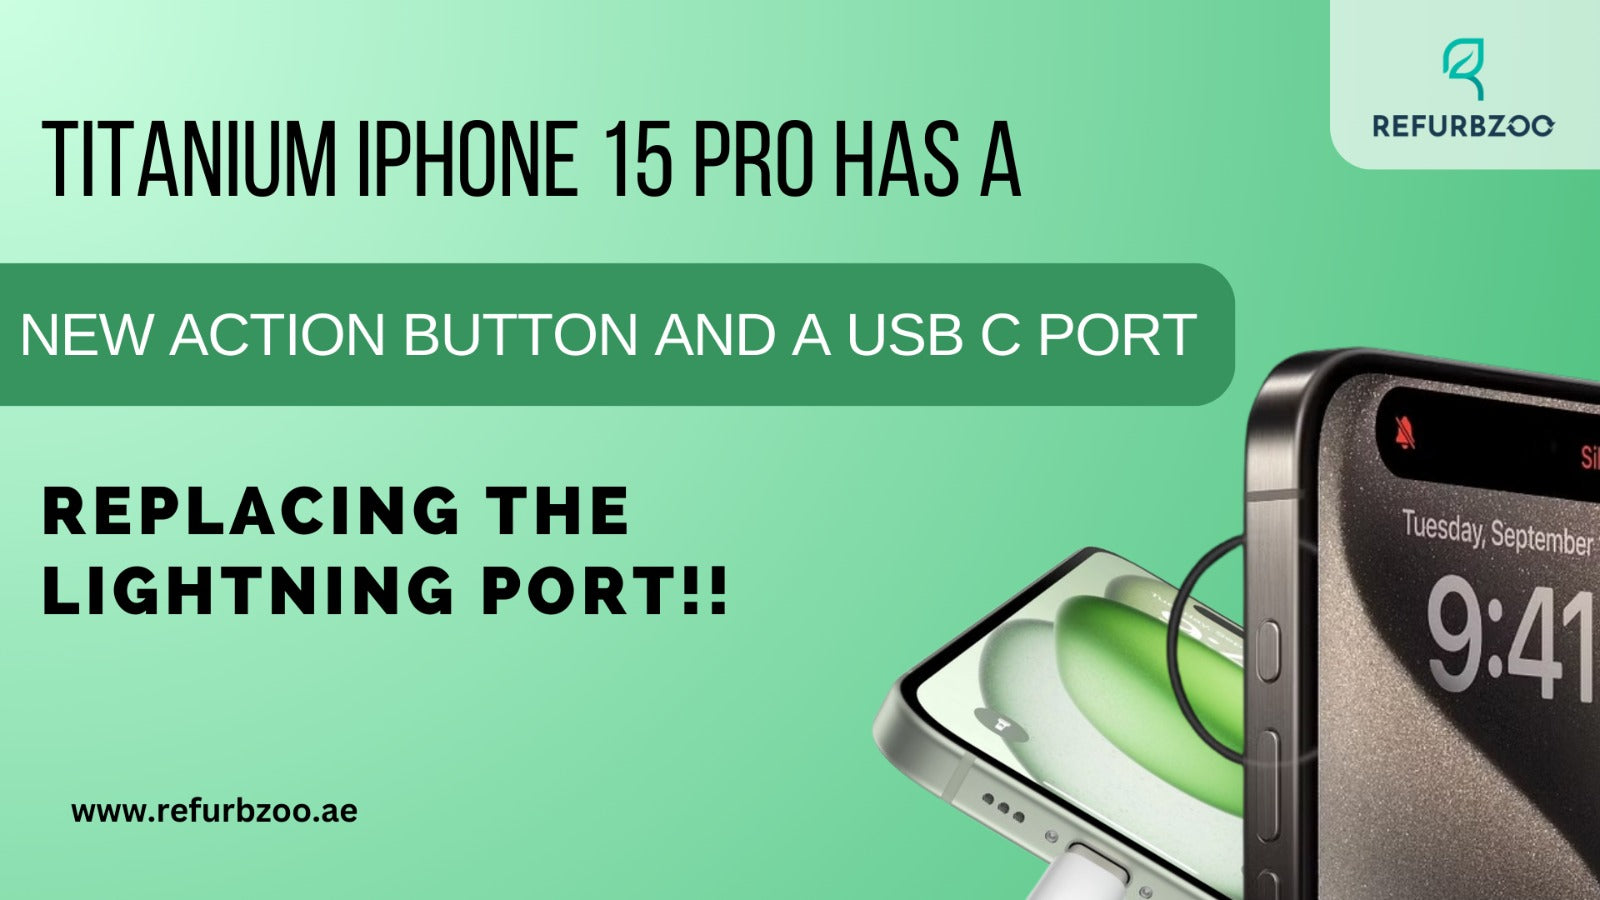 Titanium iPhone 15 Pro has a new Action Button and a USB C Port replacing the lightning port!!